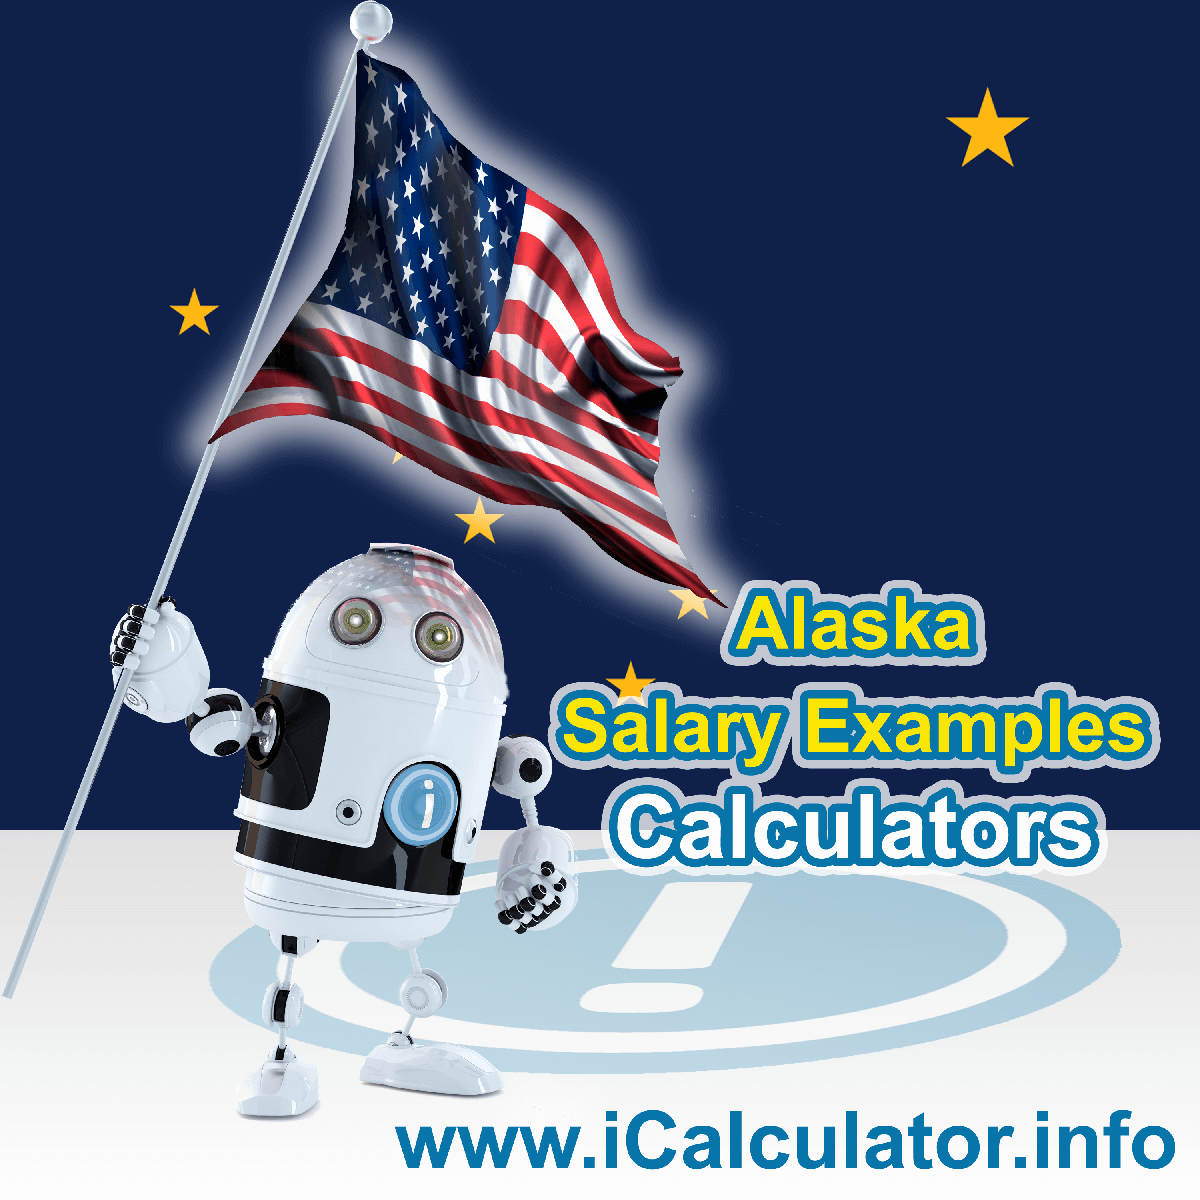 Alaska Salary Example for $ 80,000.00 in 2023 | iCalculator™ | $ 80,000.00 salary example for employee and employer paying Alaska State tincome taxes. Detailed salary after tax calculation including Alaska State Tax, Federal State Tax, Medicare Deductions, Social Security, Capital Gains and other income tax and salary deductions complete with supporting Alaska state tax tables 